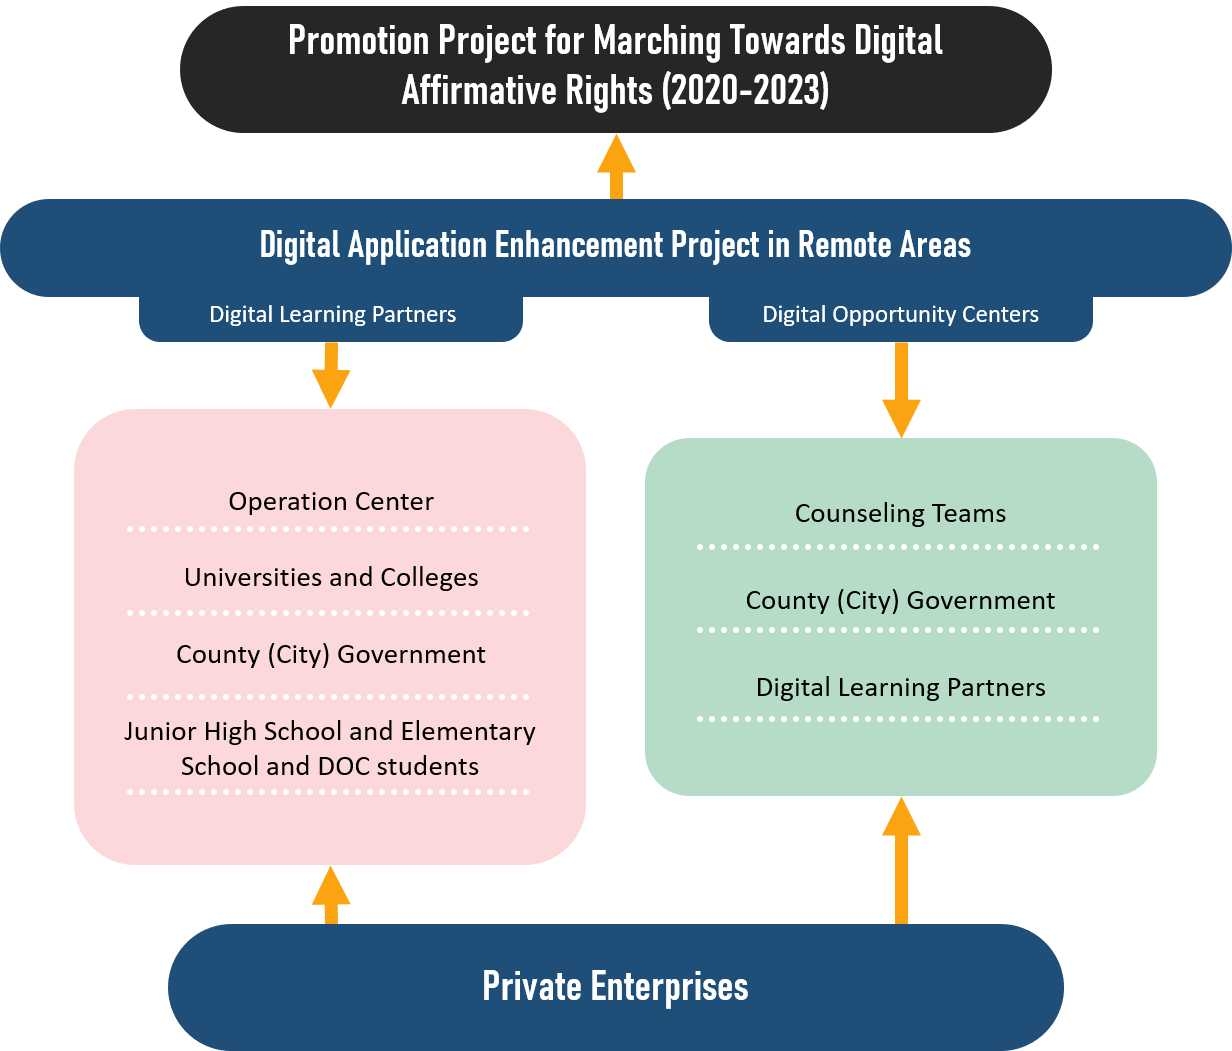 Figure 4: Structural diagram of the promotion plan by the Ministry of Education.